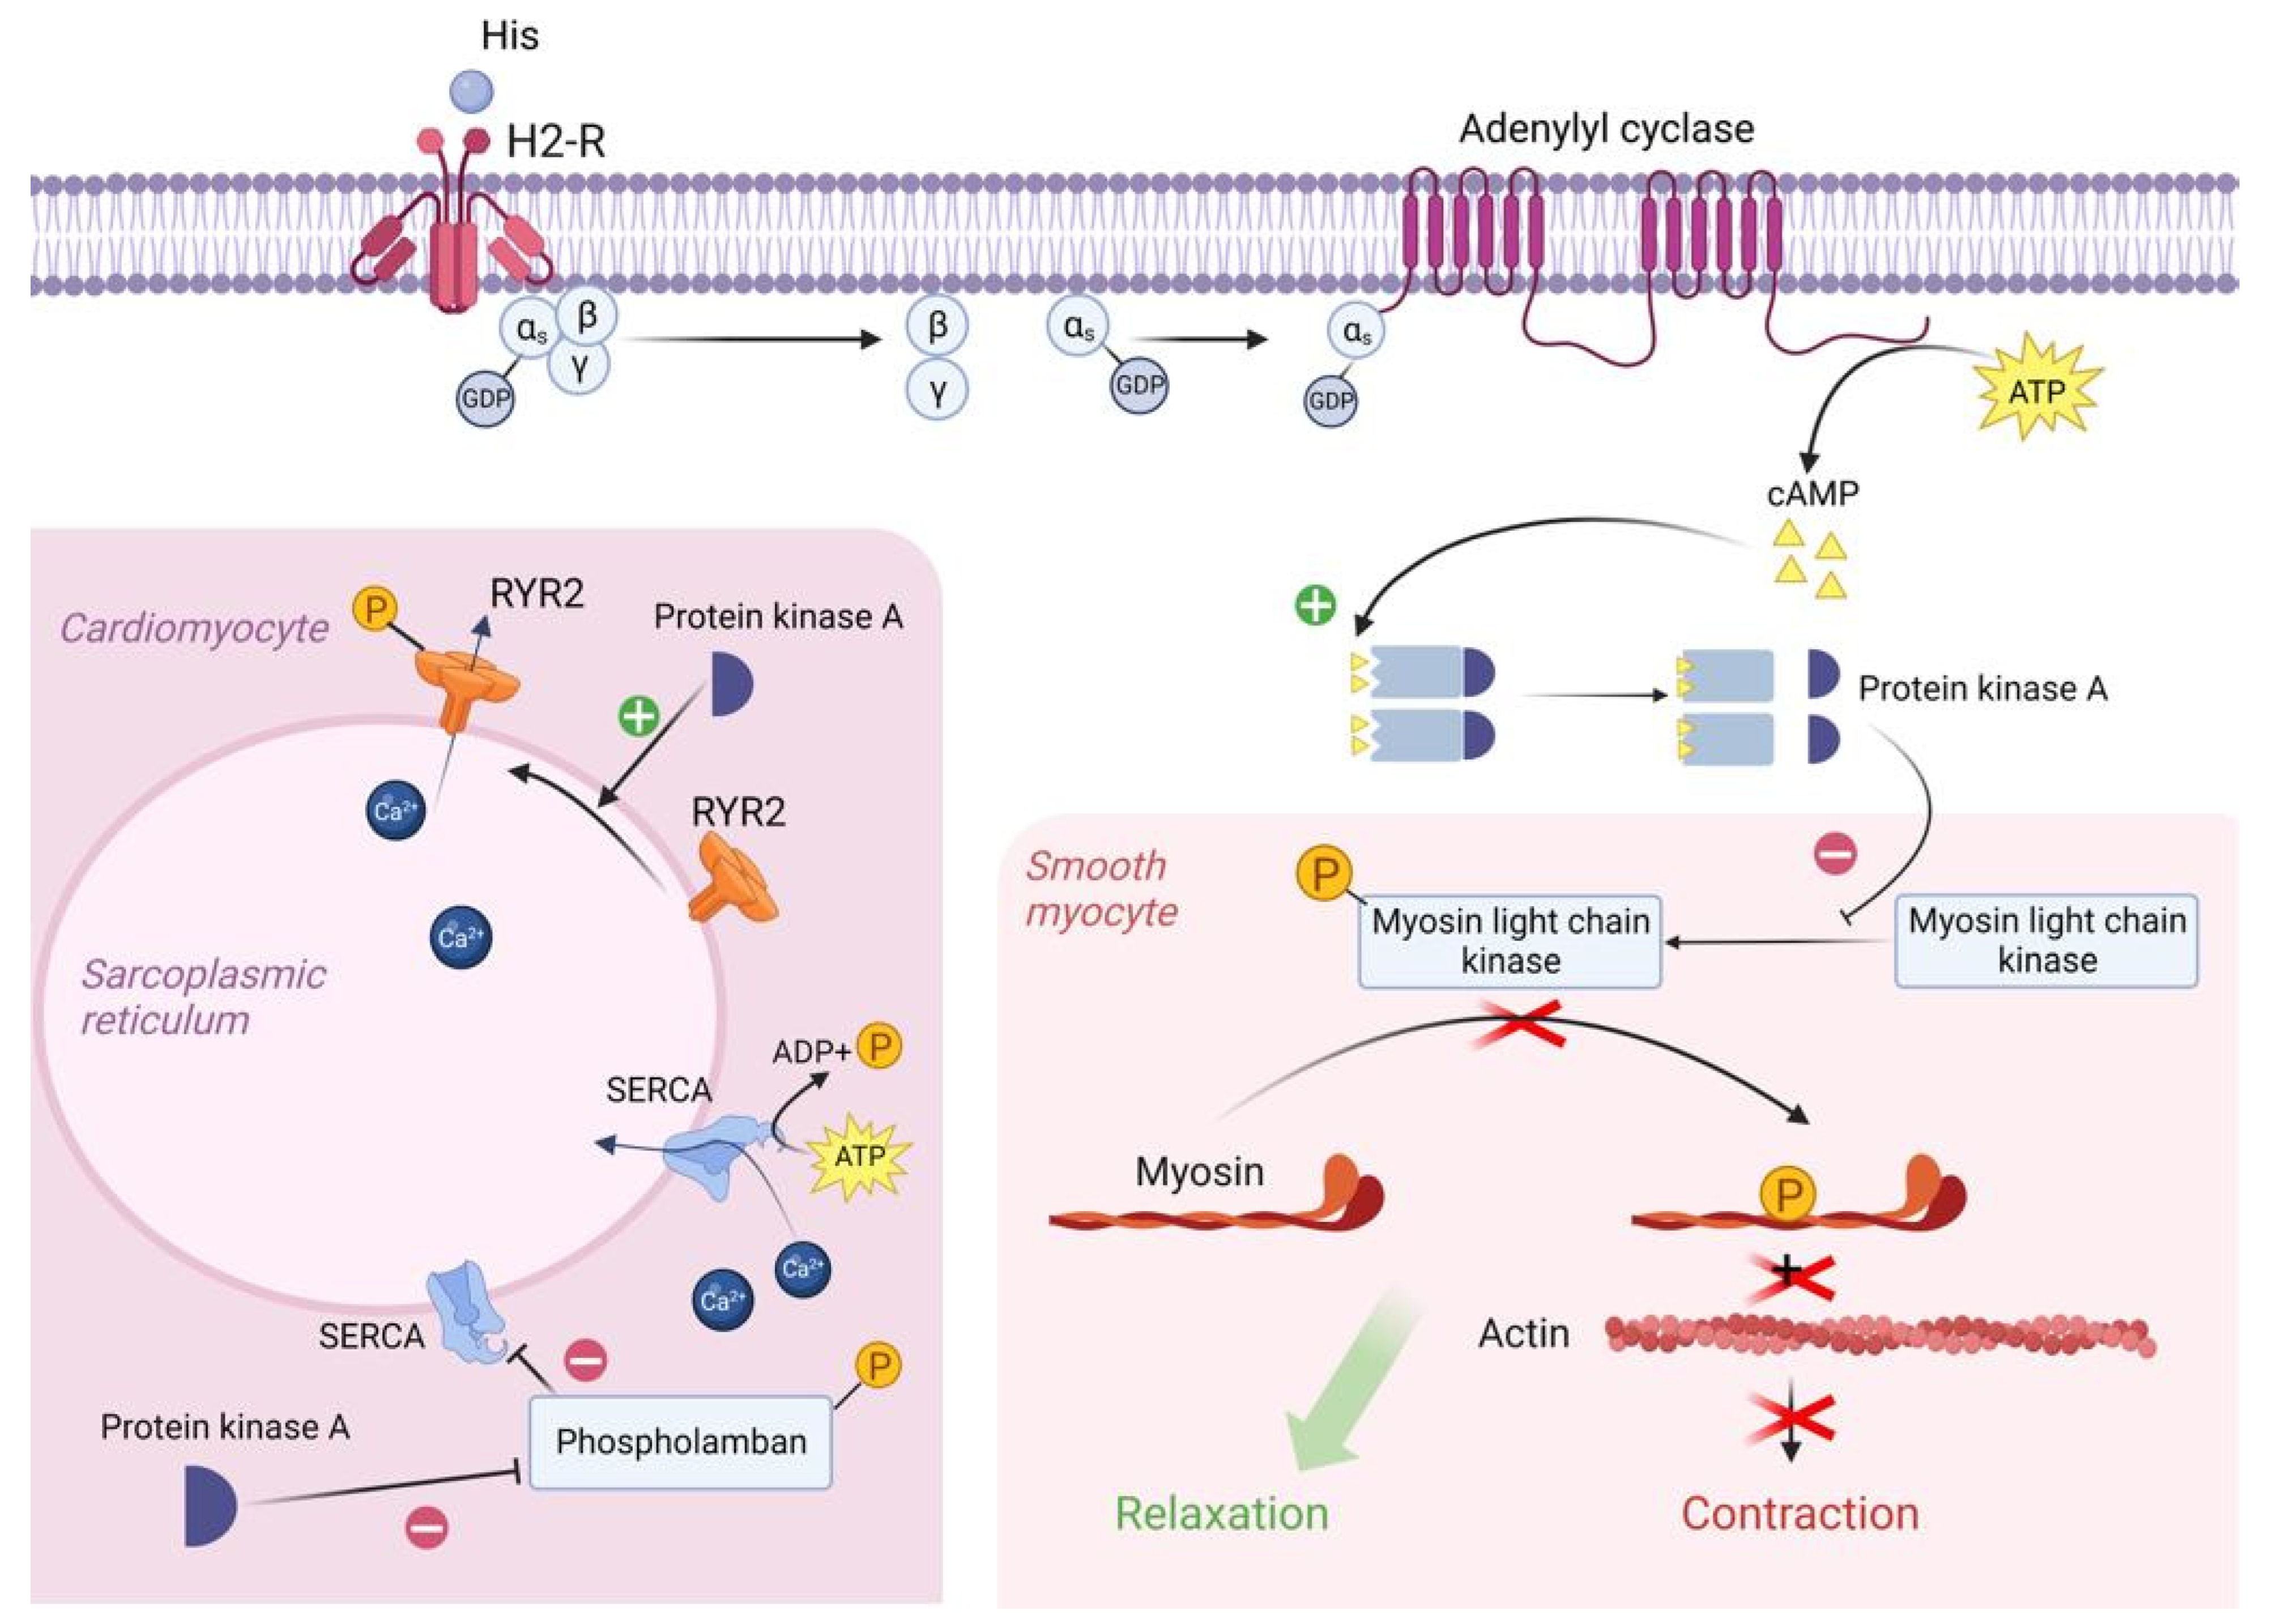 Molecular Mechanisms of Scombroid Food Poisoning